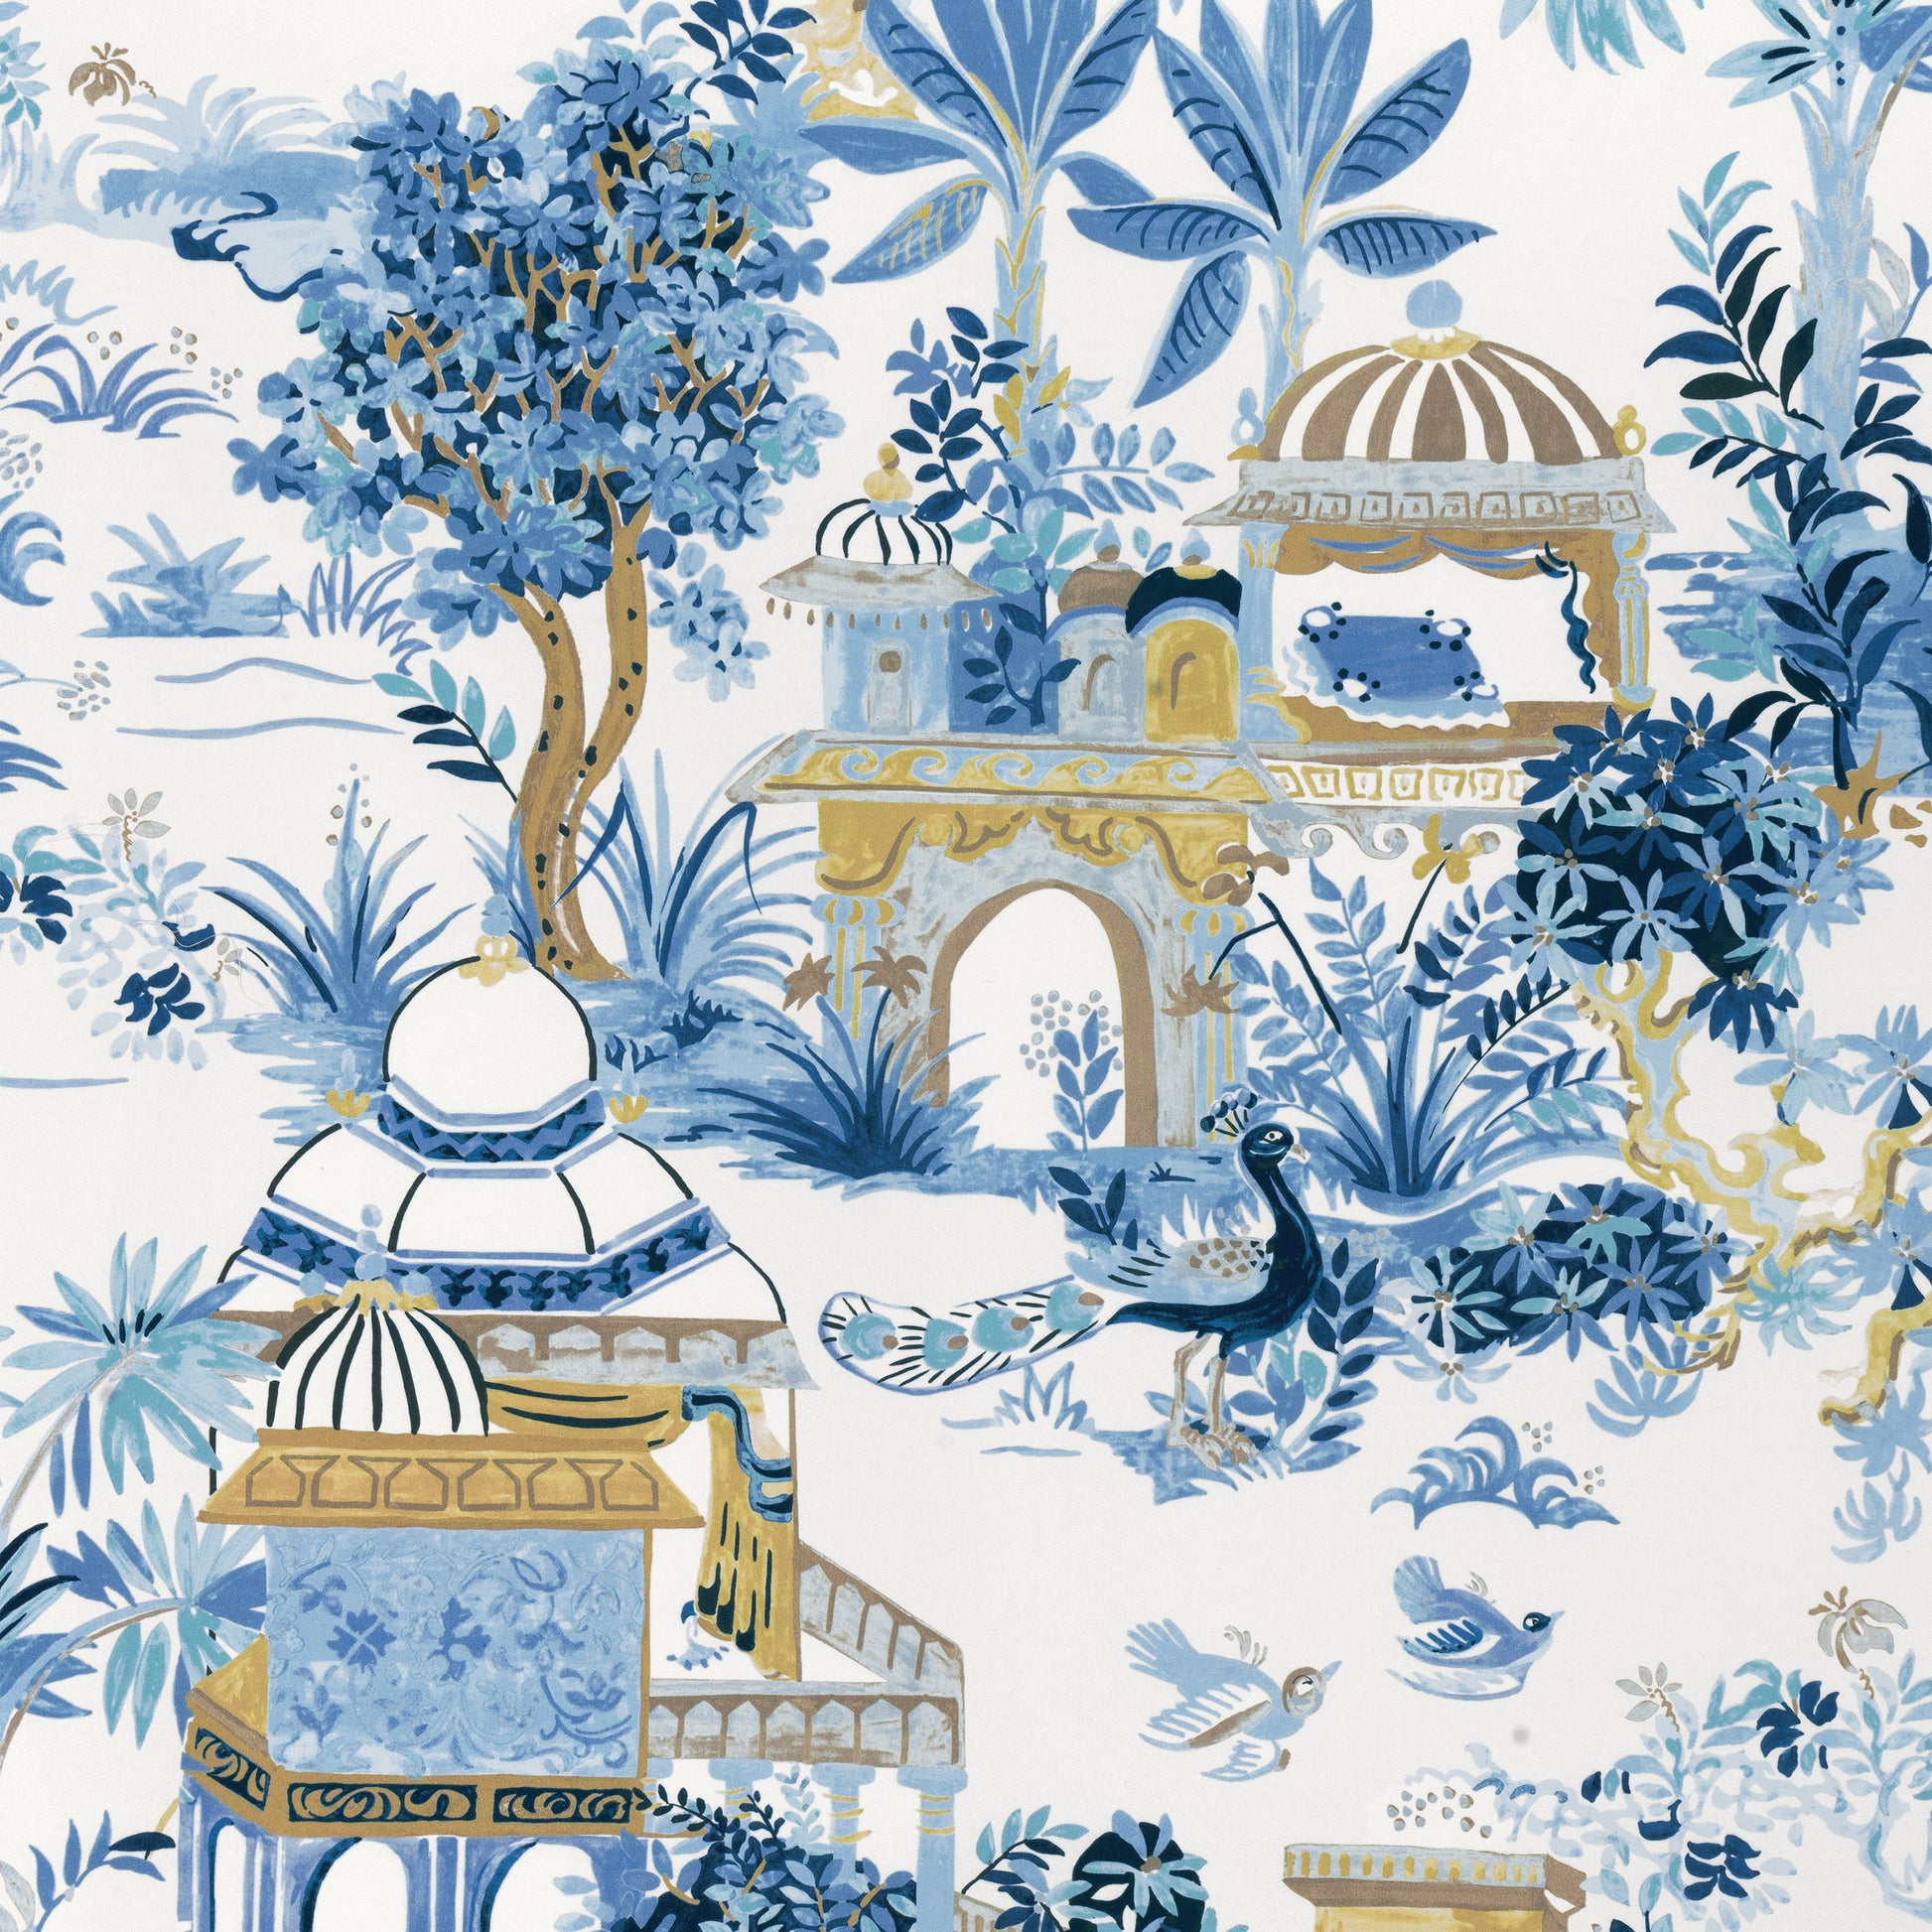 Purchase Thibaut Fabric Item# F920821 pattern name Mystic Garden color Blue and White